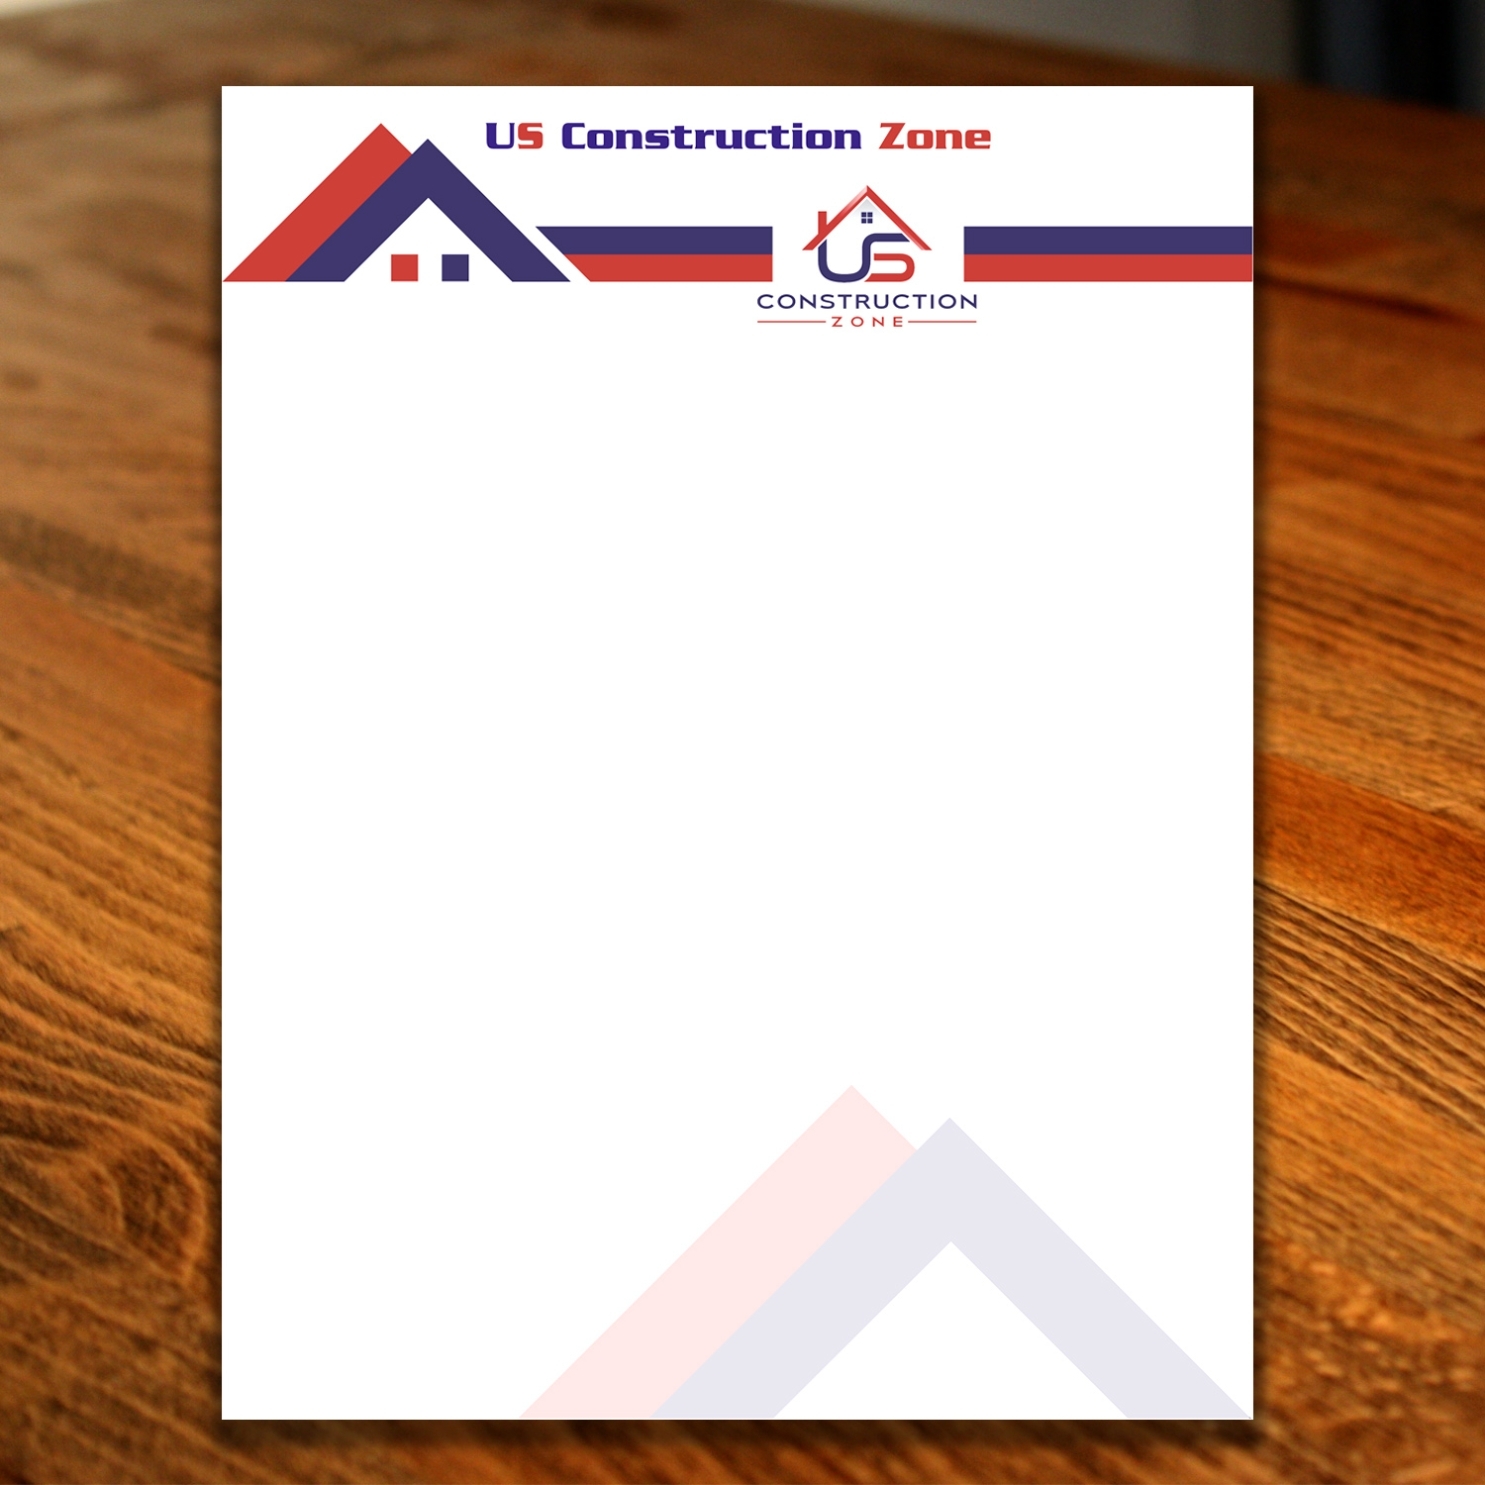 Letterhead Design For Us Construction Zone, Inc. By Ariyapperuma9016 intended for Builders Letterhead Template